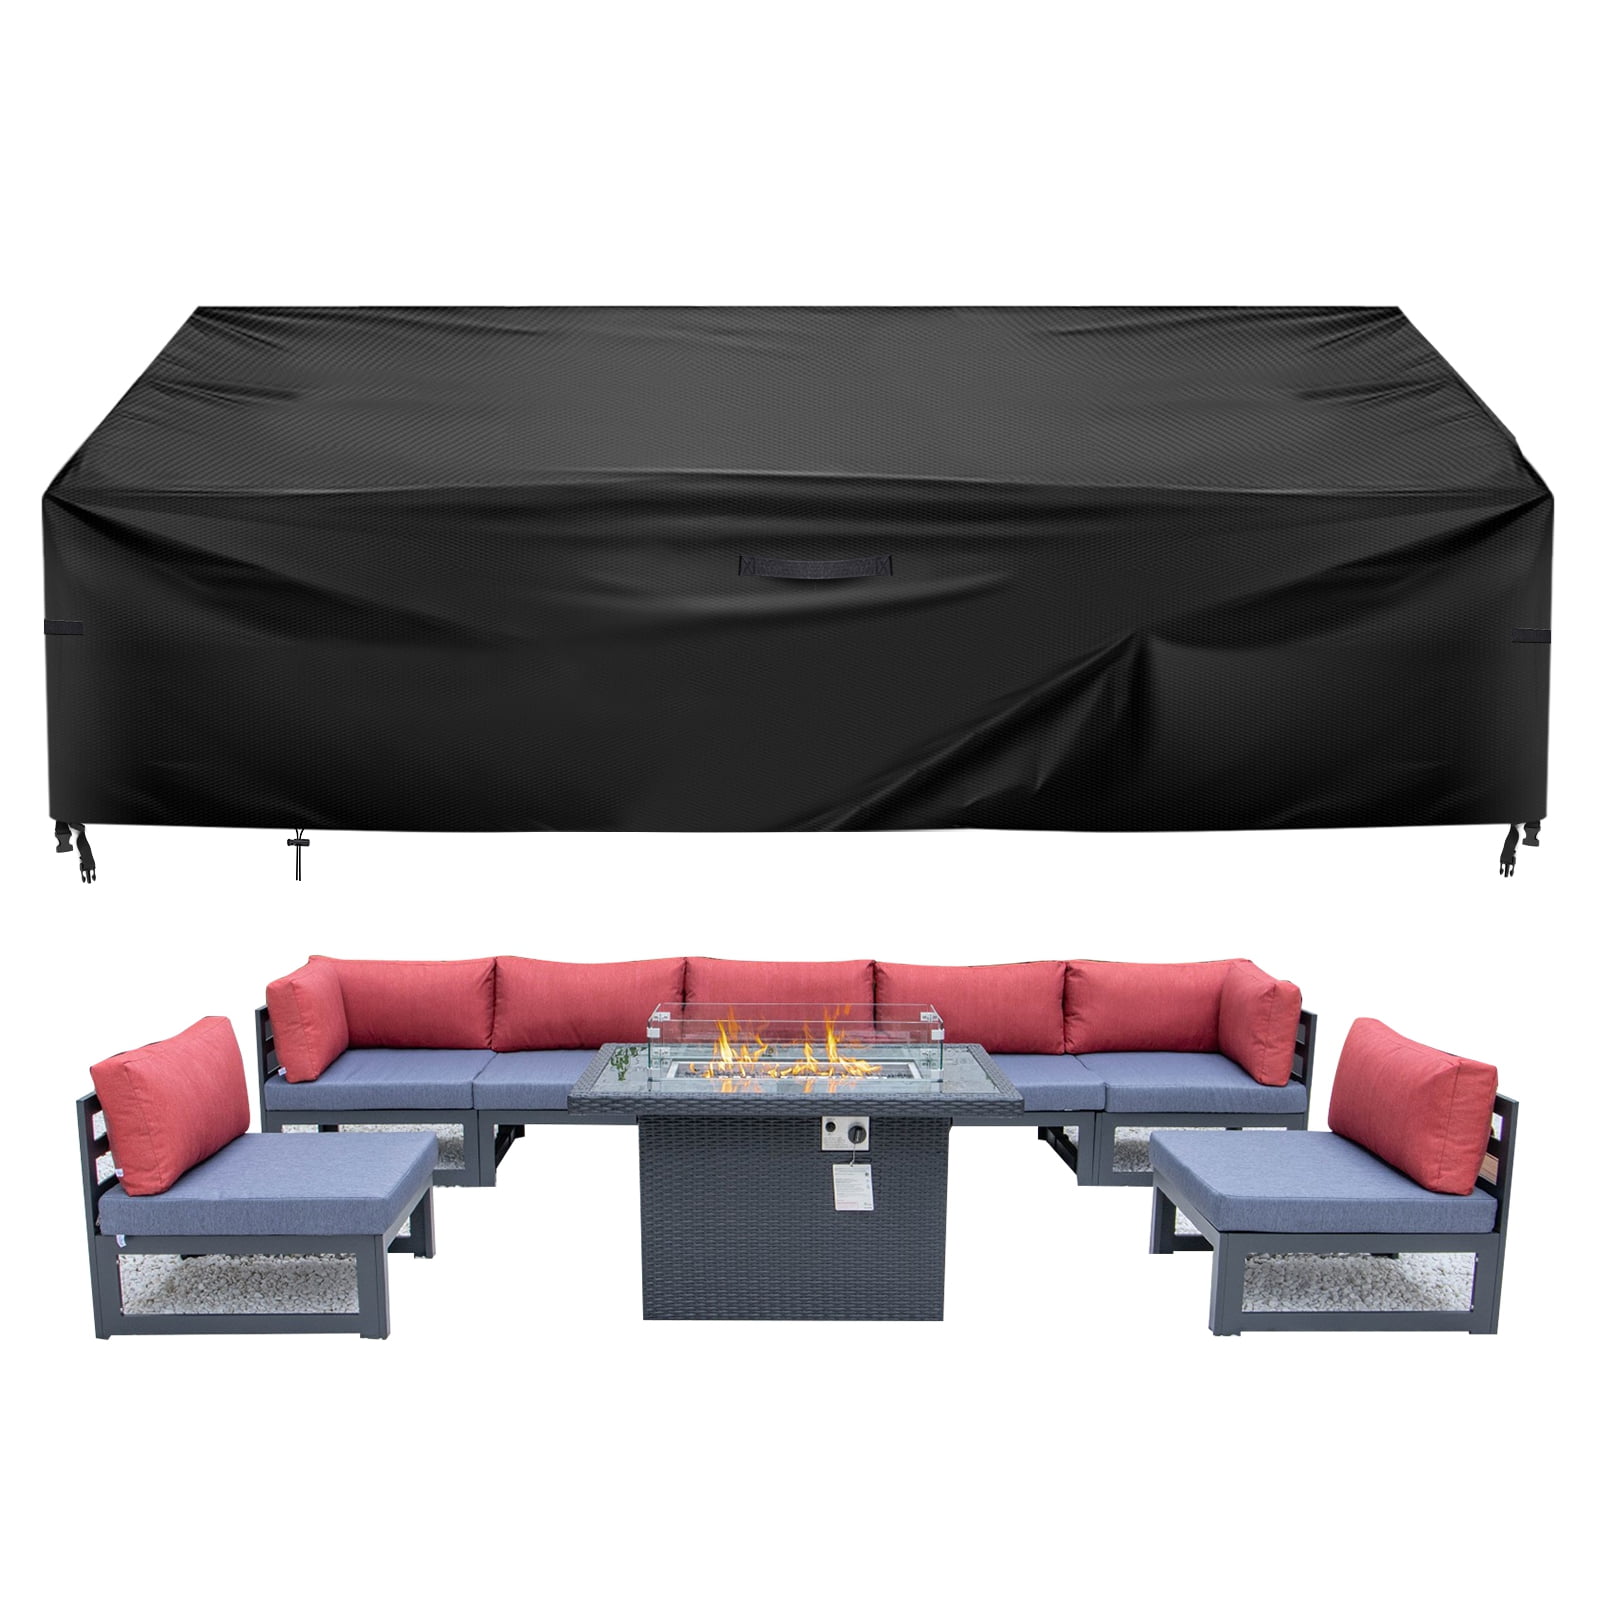 WATERPROOF GARDEN PATIO FURNITURE SET COVERS LARGE TABLE SOFA BENCH CUBE OUTDOOR 